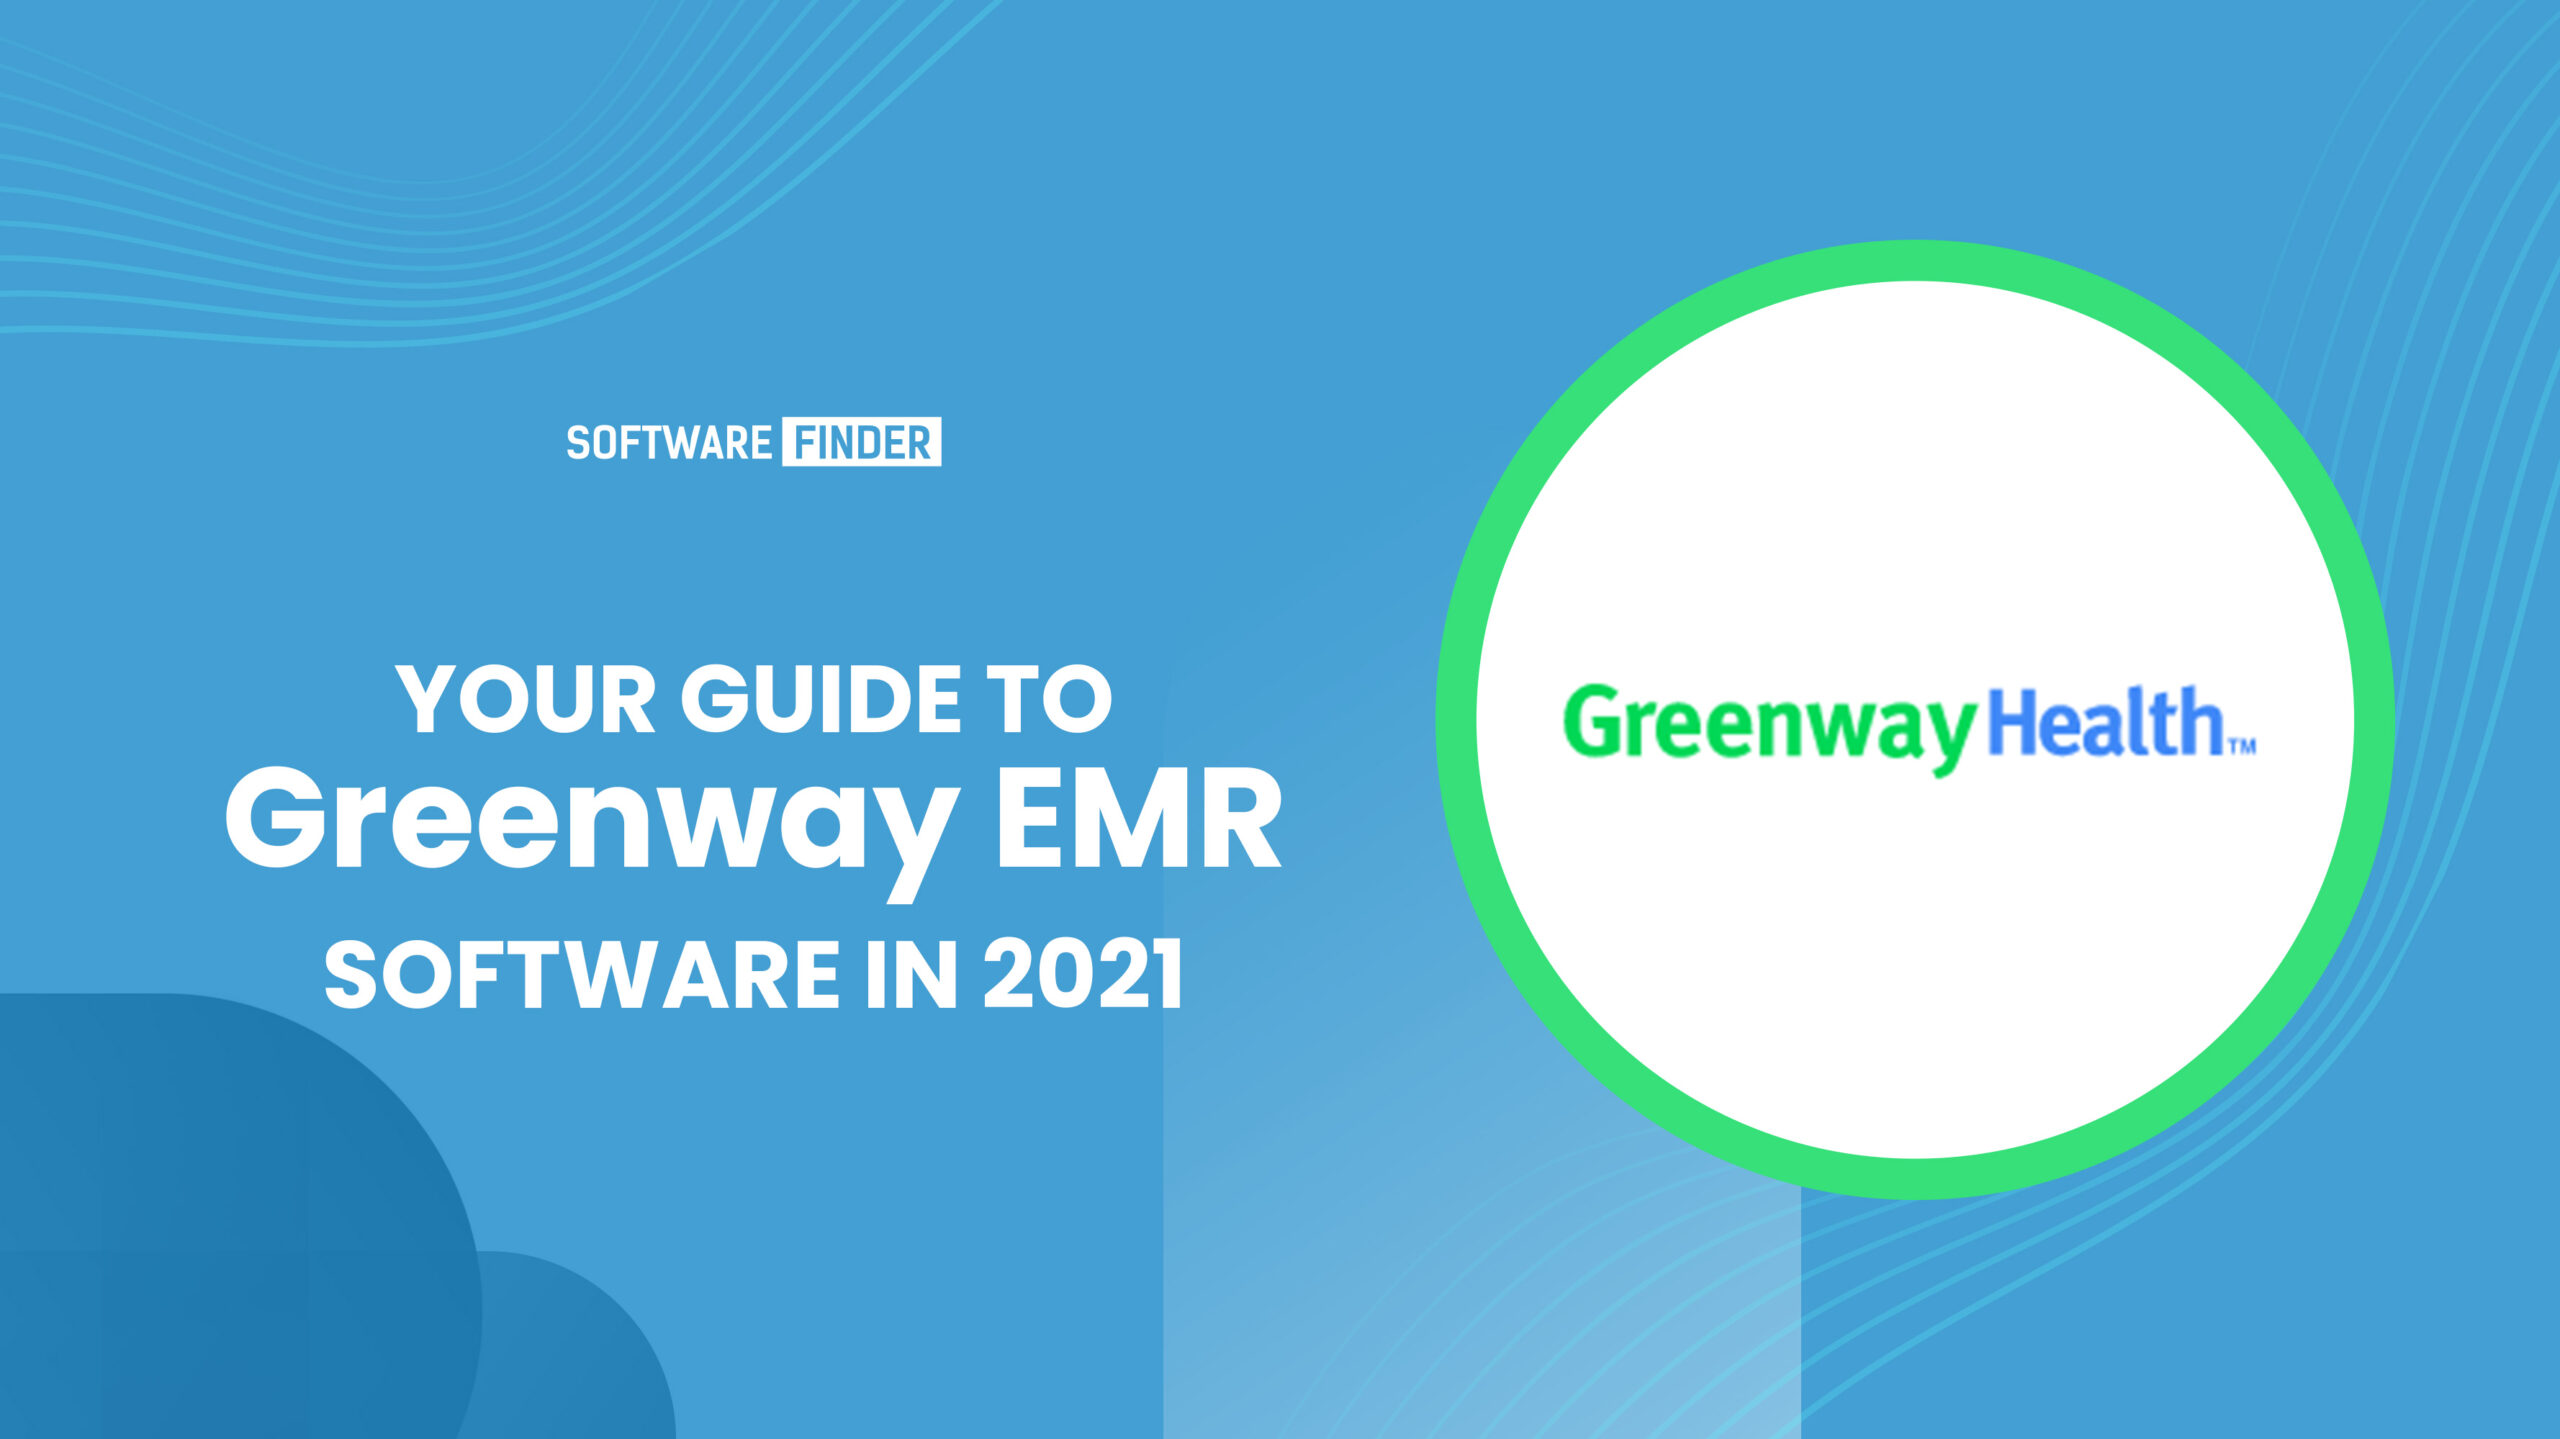 Your guide to greenway EHR software in 2021